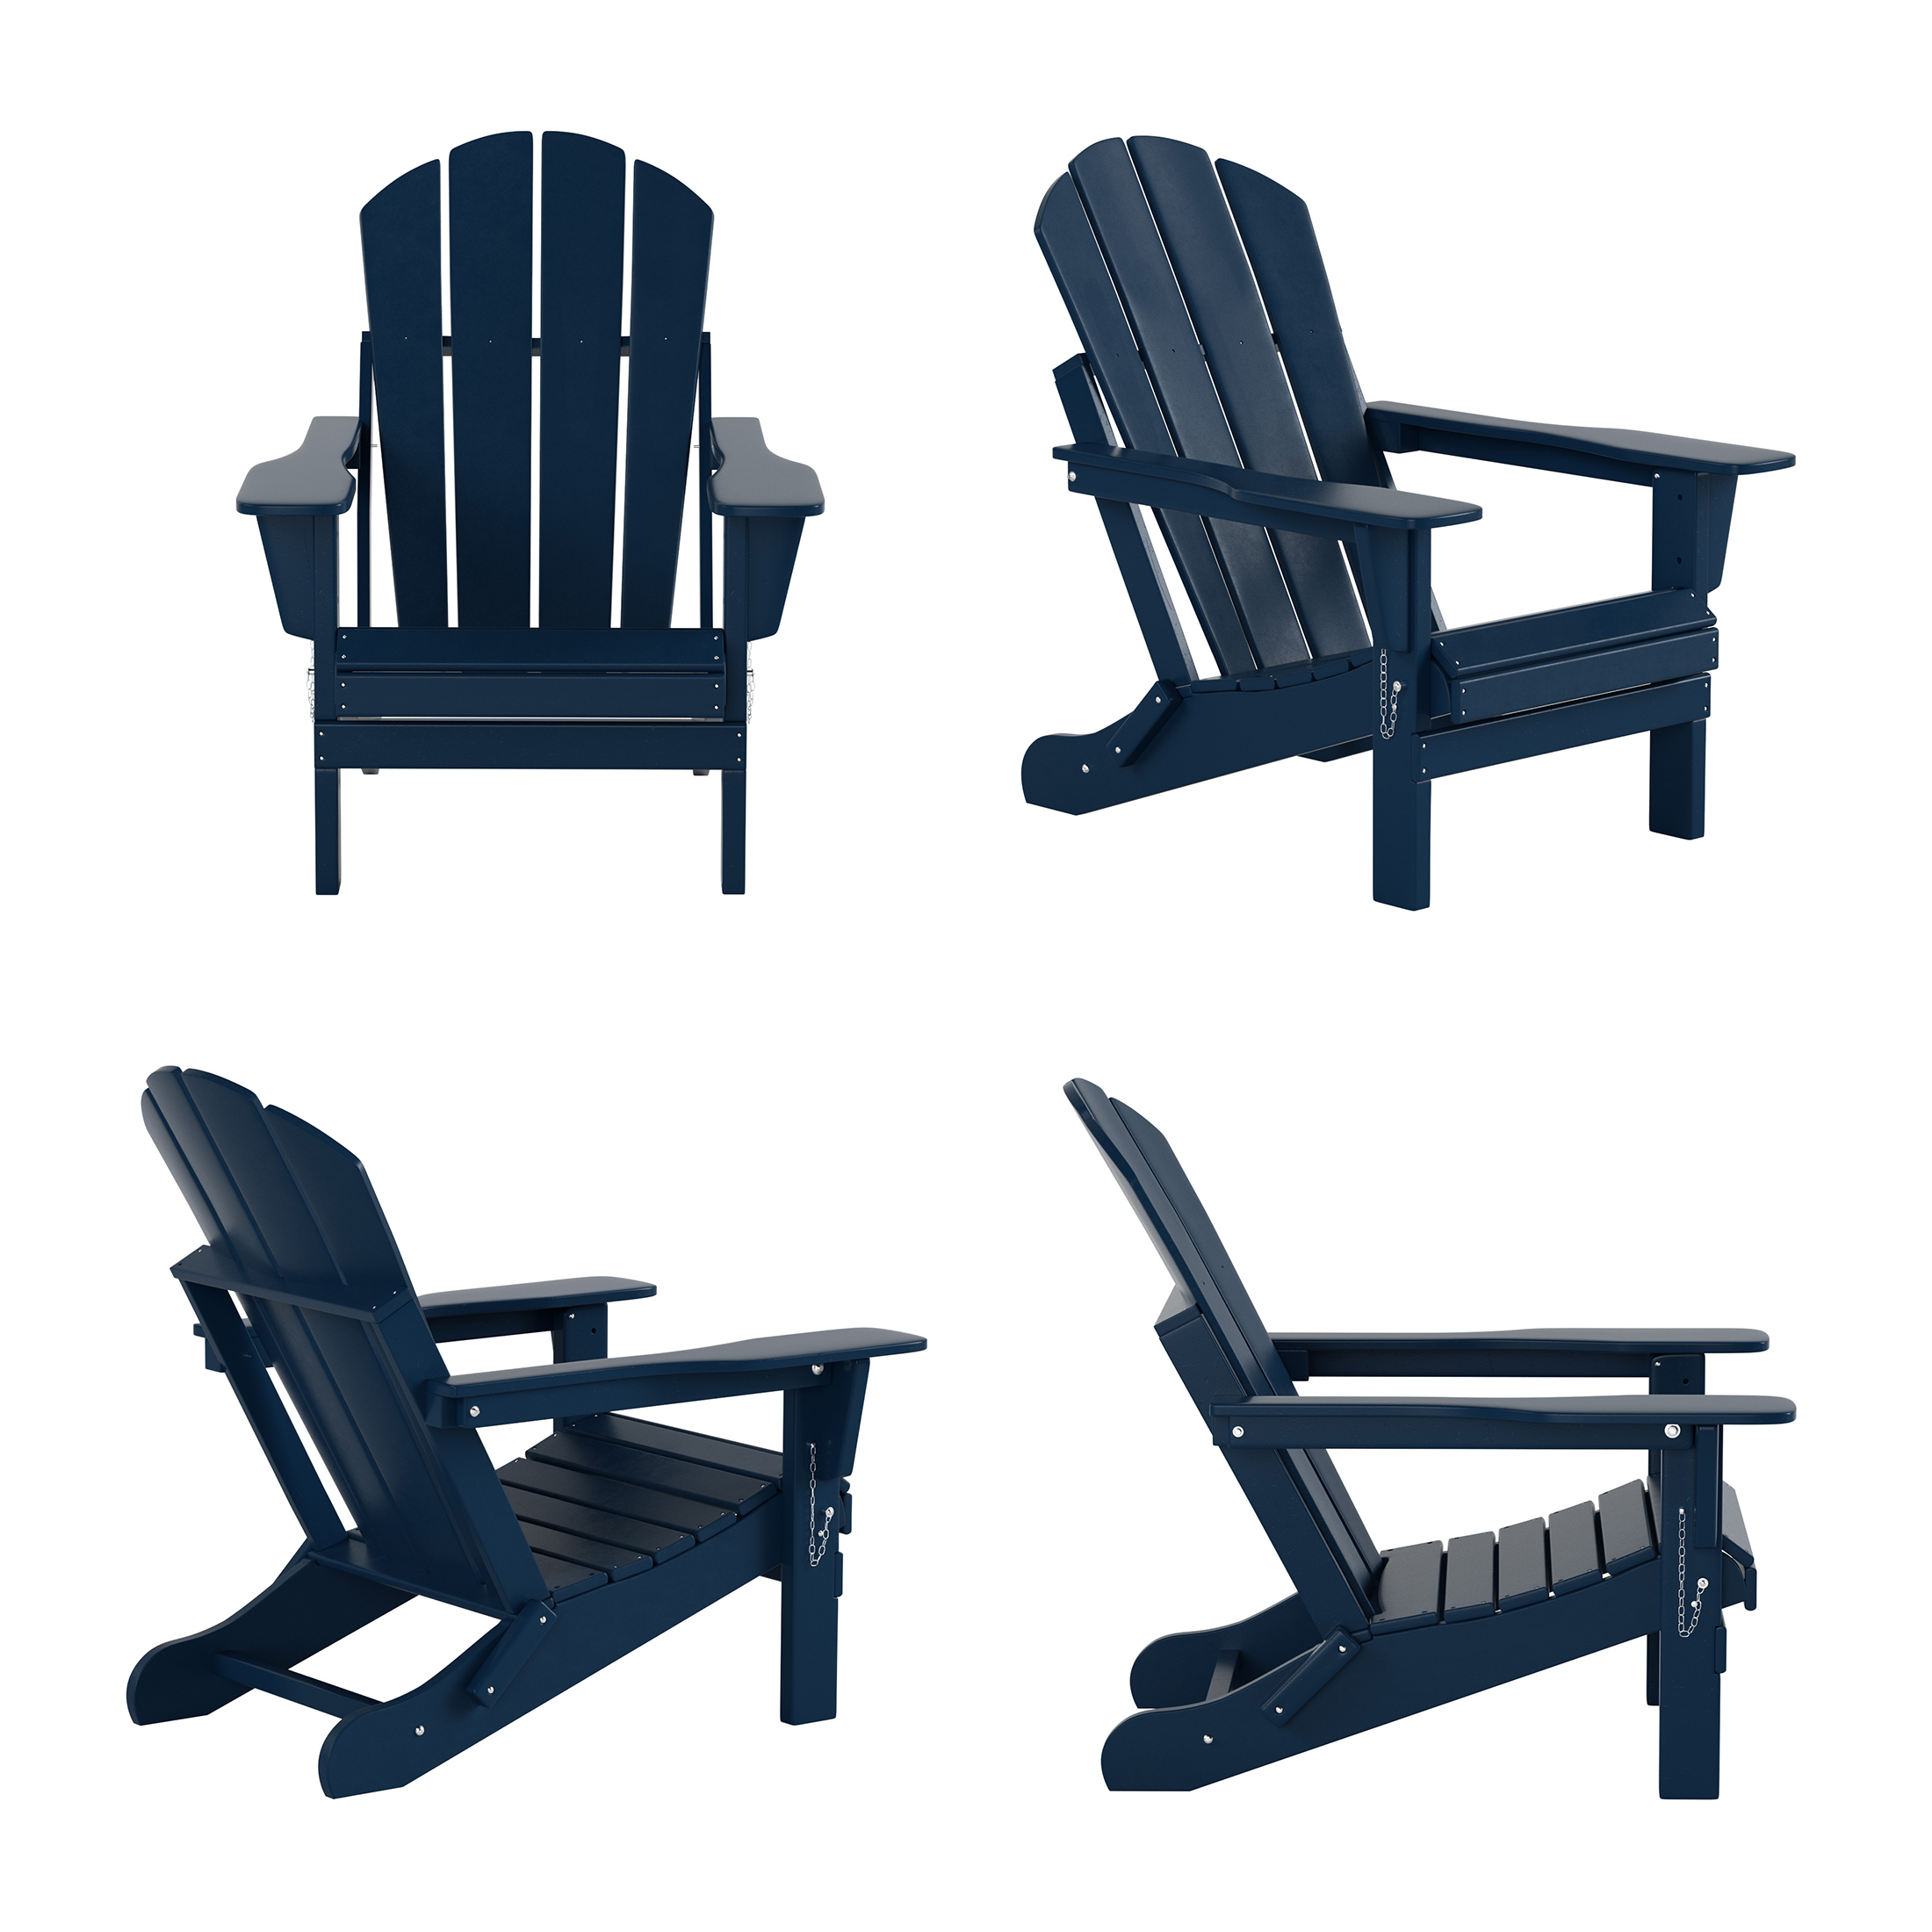 WestinTrends Malibu Outdoor Lounge Chairs, 3-Pieces Adirondack Chair Set with Ottoman and Side Table, All Weather Poly Lumber Patio Lawn Folding Chair for Outside Pool Garden Backyard, Navy Blue - image 4 of 7